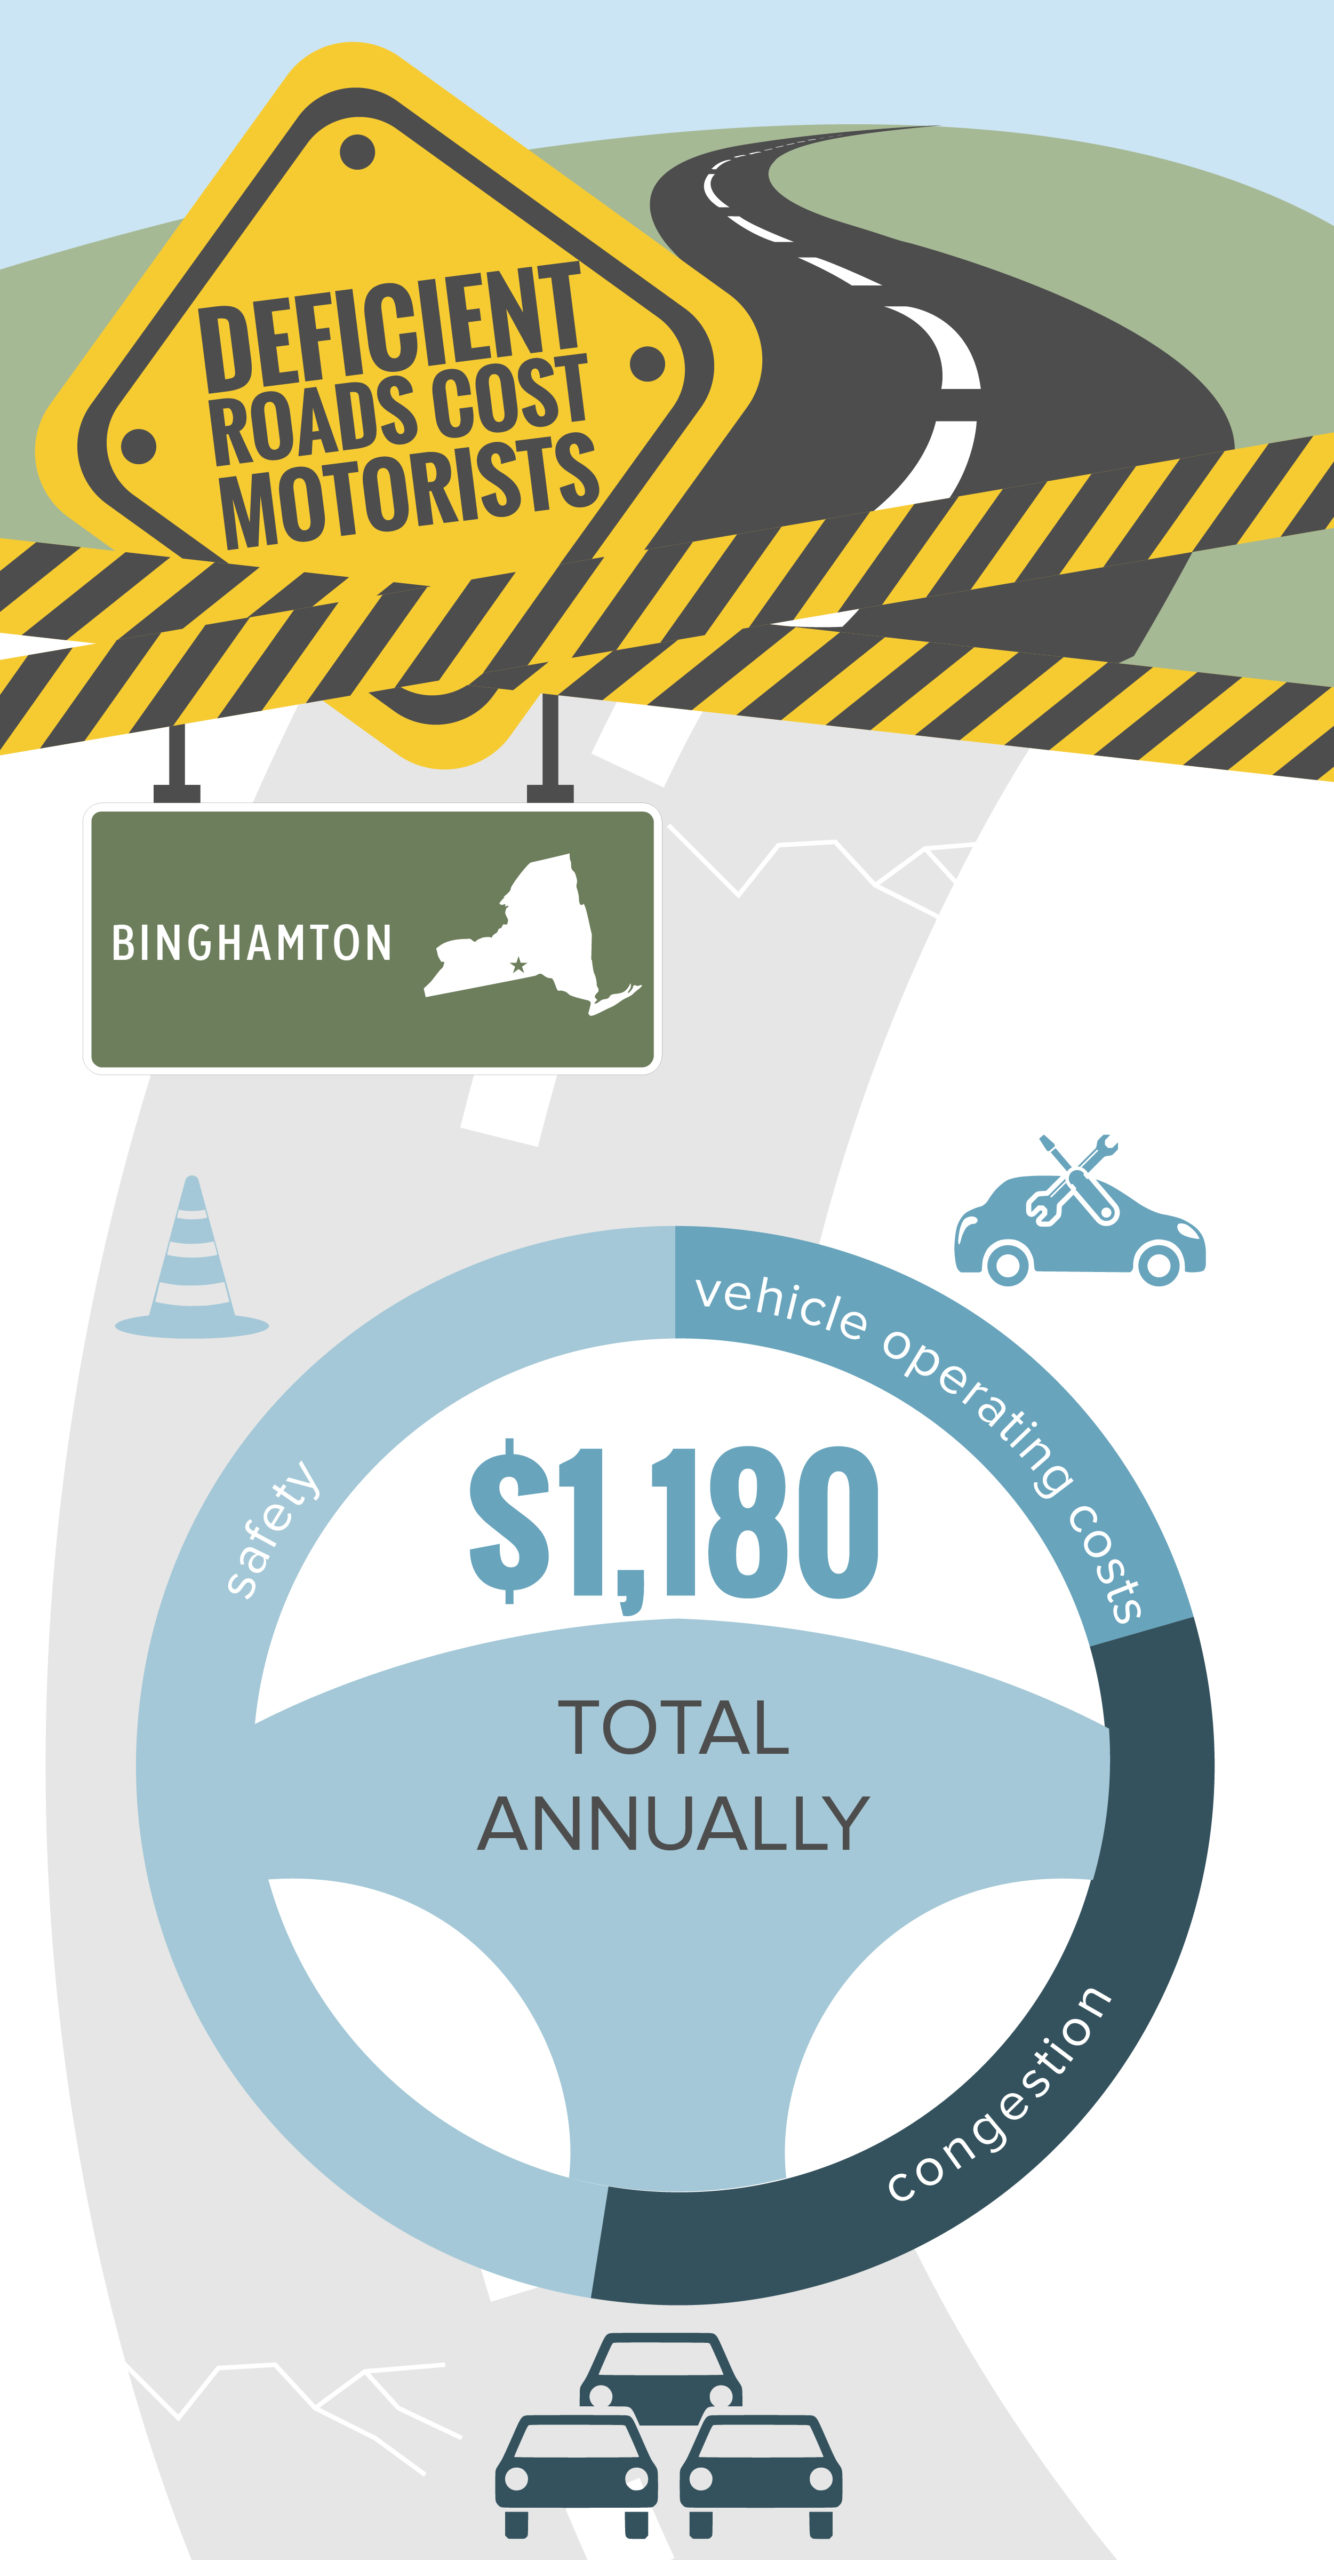 Binghamton Deficient Roads Cost to Motorists Infographic – January 2022